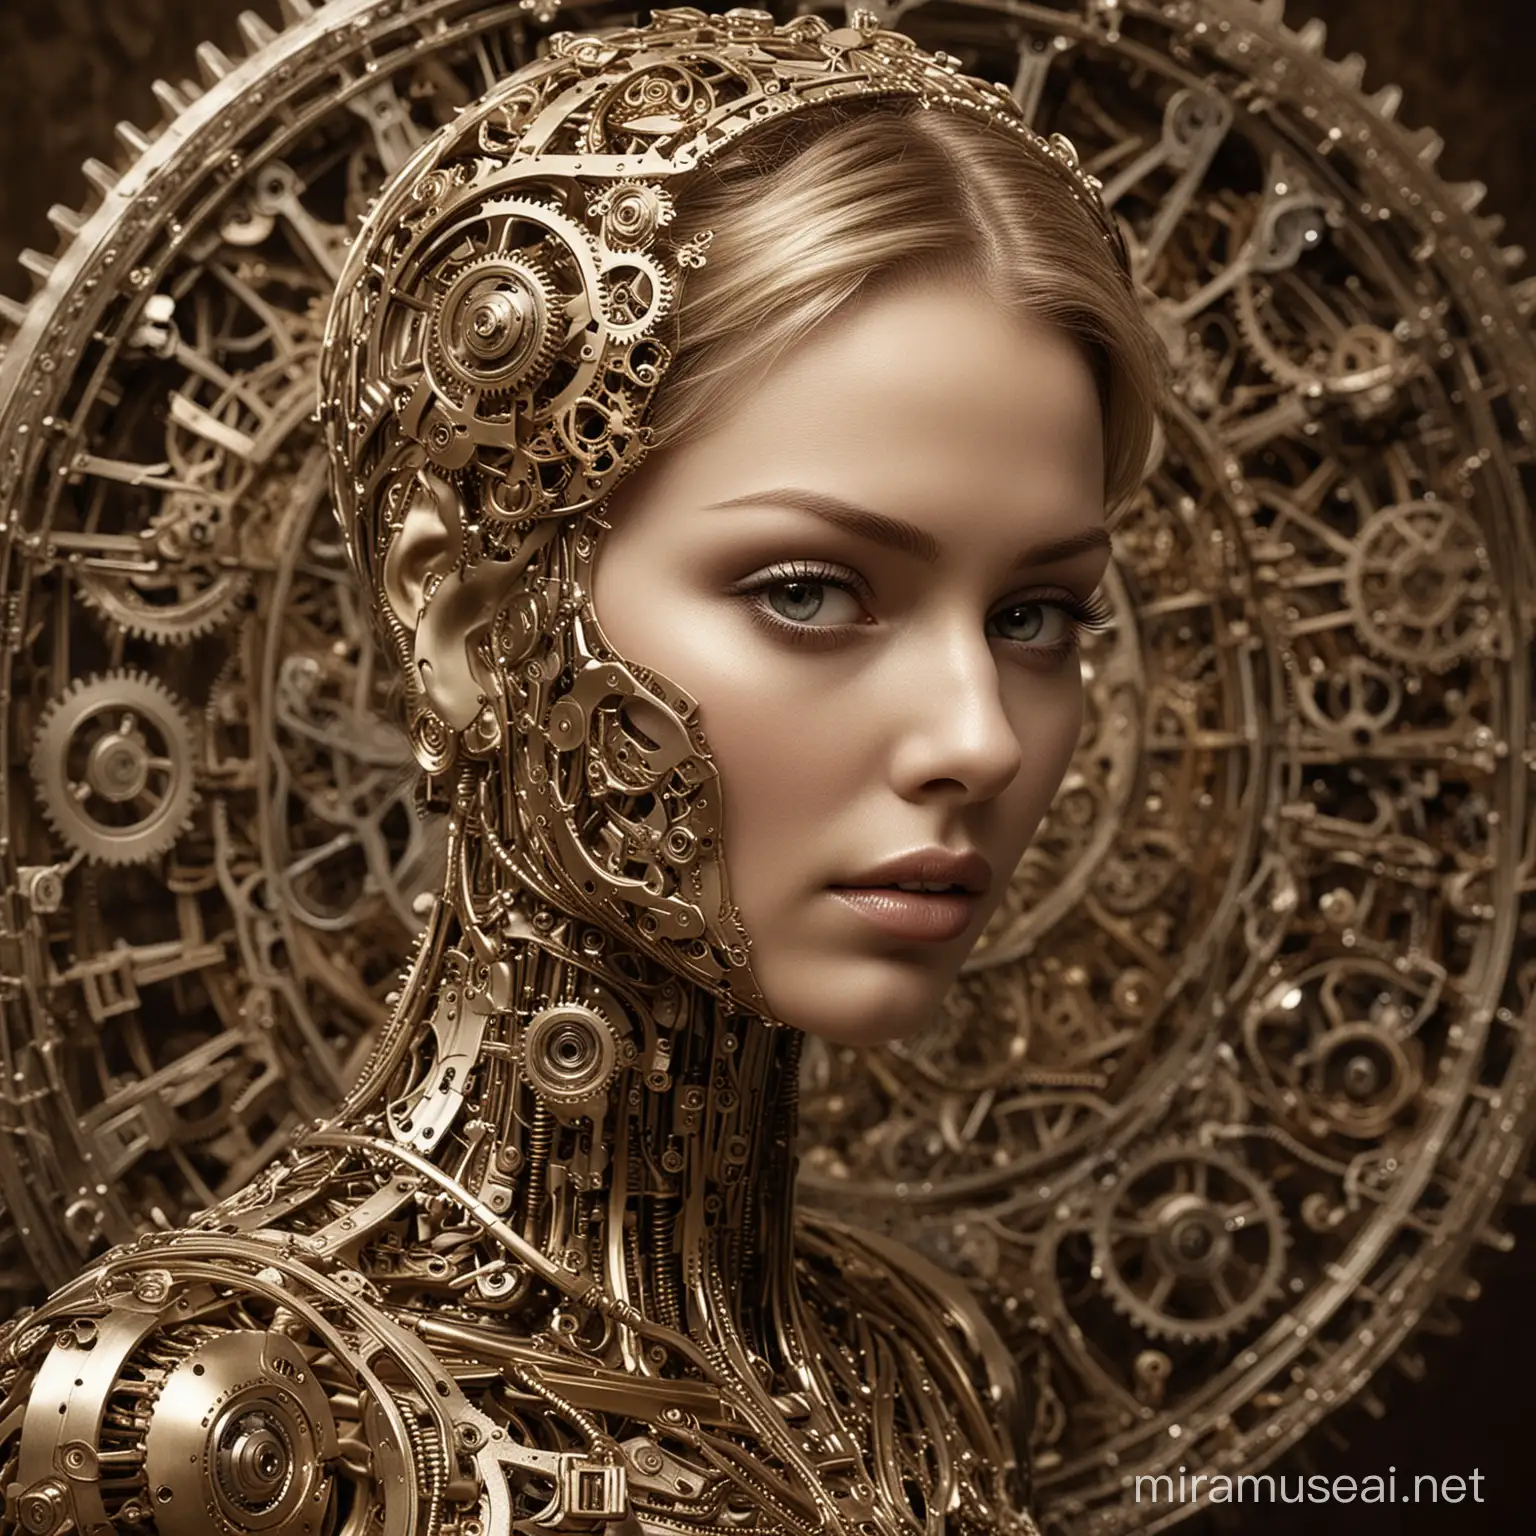 A mysteriously elegant neo-victorian cybernetic implant gleams with intricate brass gears and delicate clockwork, seamlessly melding man and machine. This captivating centerpiece in the photograph, a vintage sepia-toned portrait, exudes an aura of refined steampunk sophistication. Every detail is crisply captured, from the fine filigree of the implant to the subtle hints of wear and tear, creating a mesmerizing juxtaposition of old-world charm and cutting-edge technology. The image quality is impeccable, with rich textures and striking contrasts that bring the implant to vivid life.